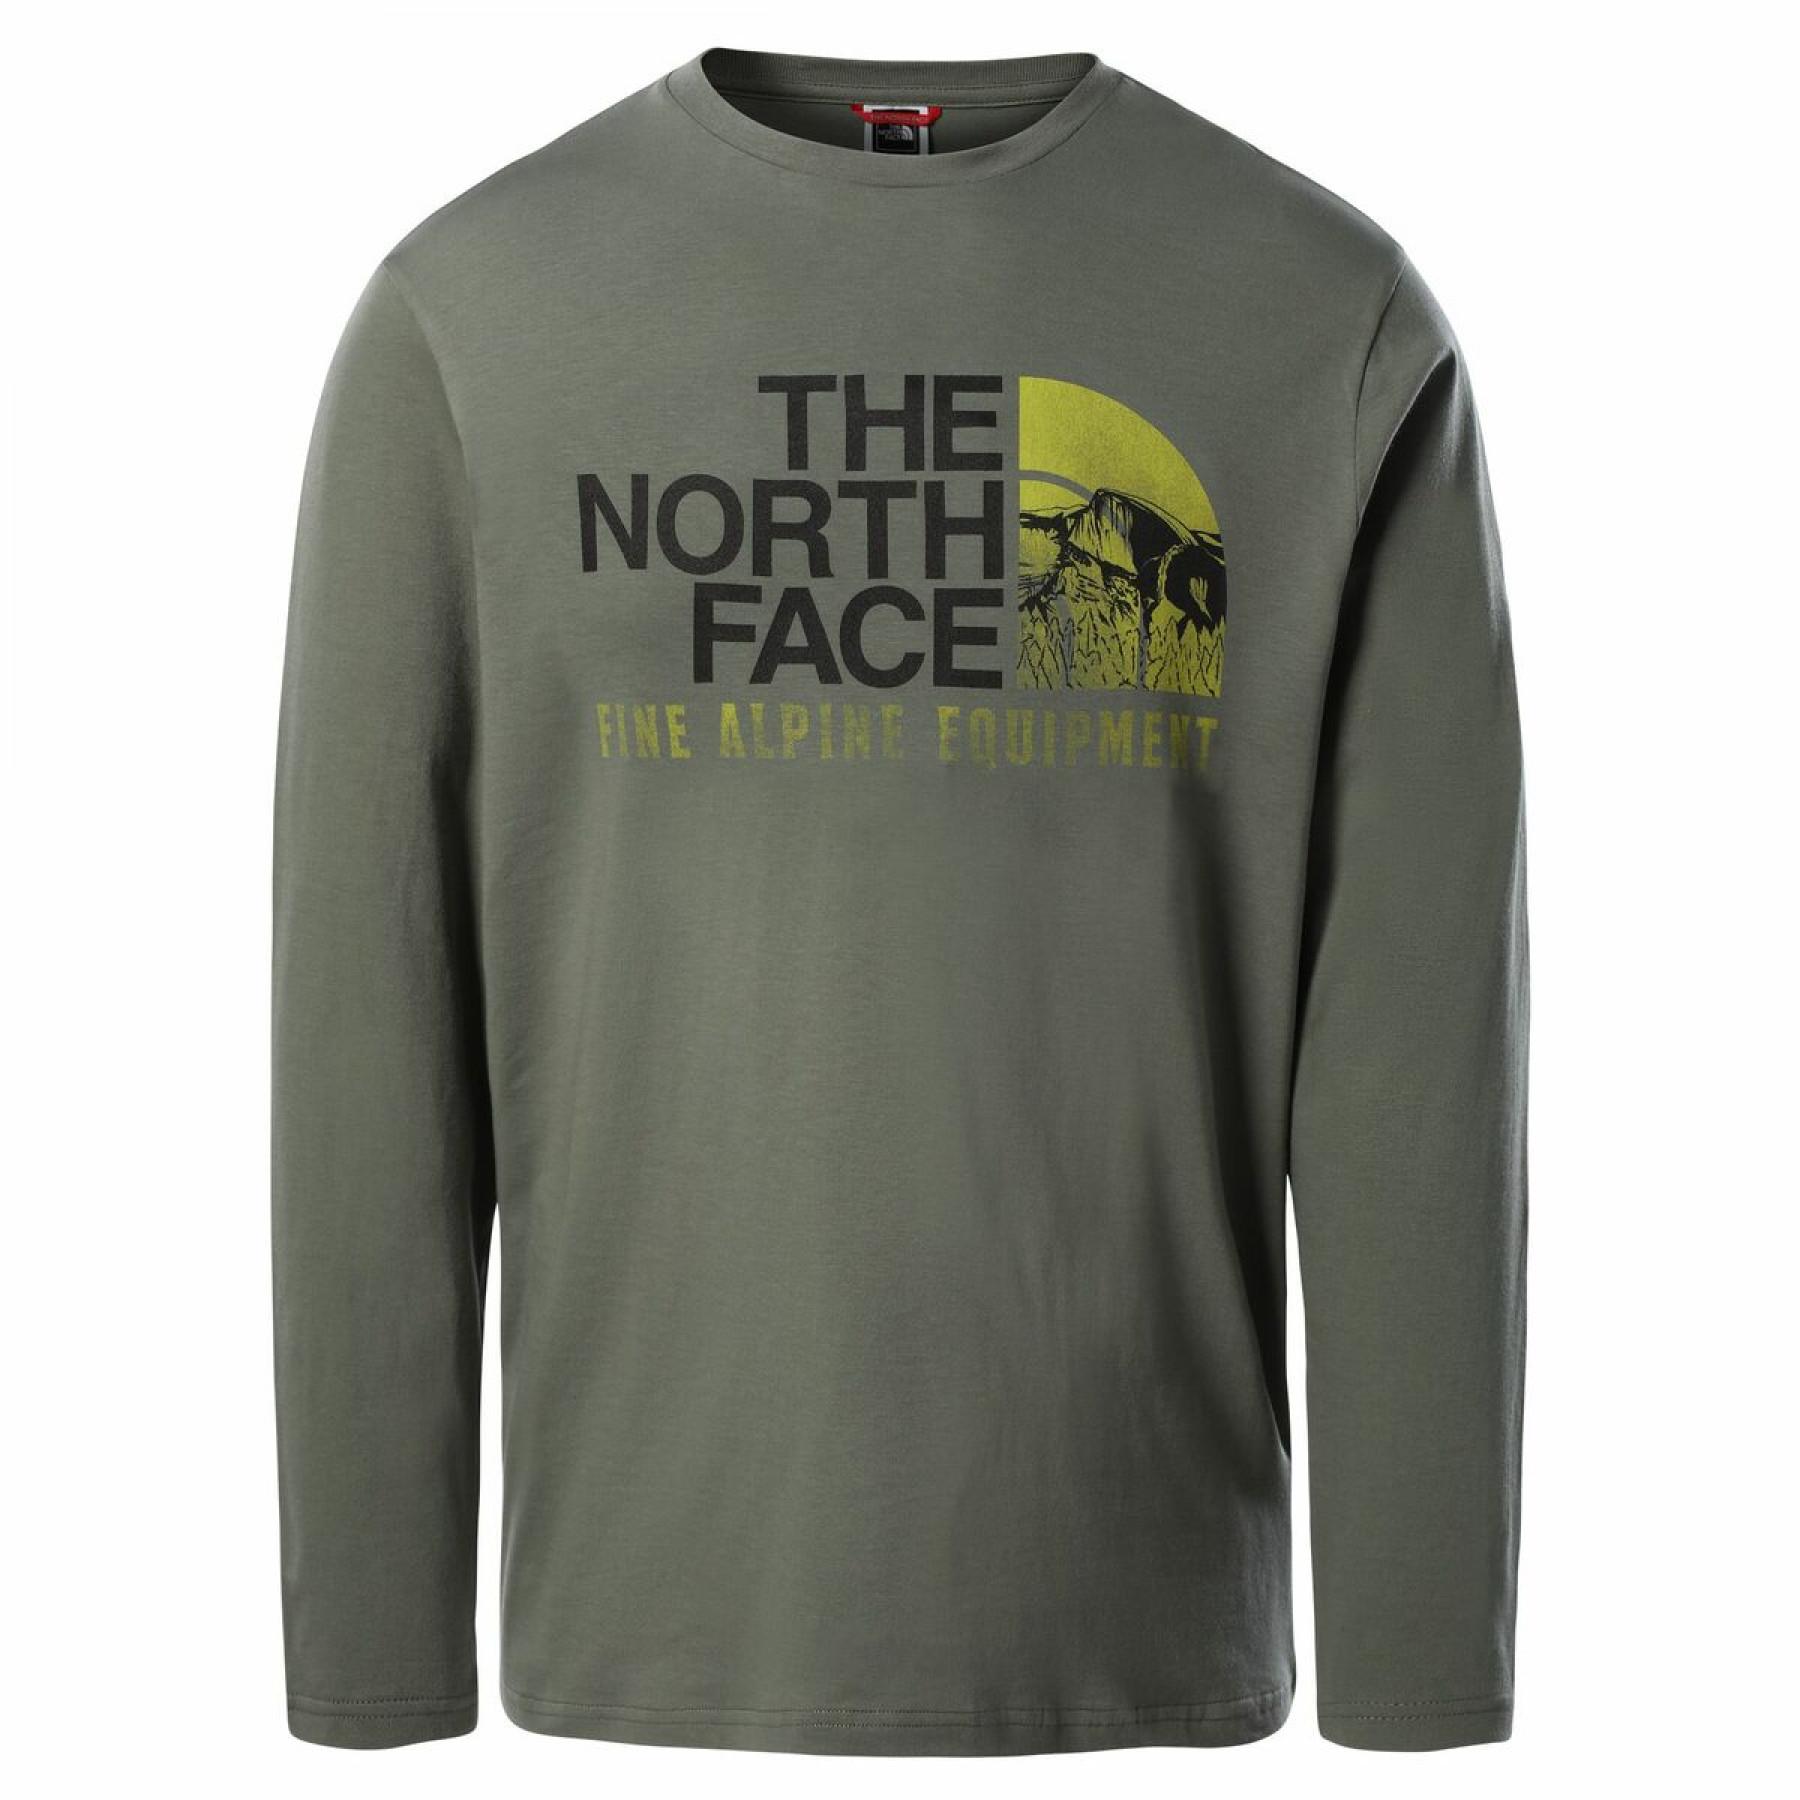 Langarm-T-Shirt The North Face Image Ideals